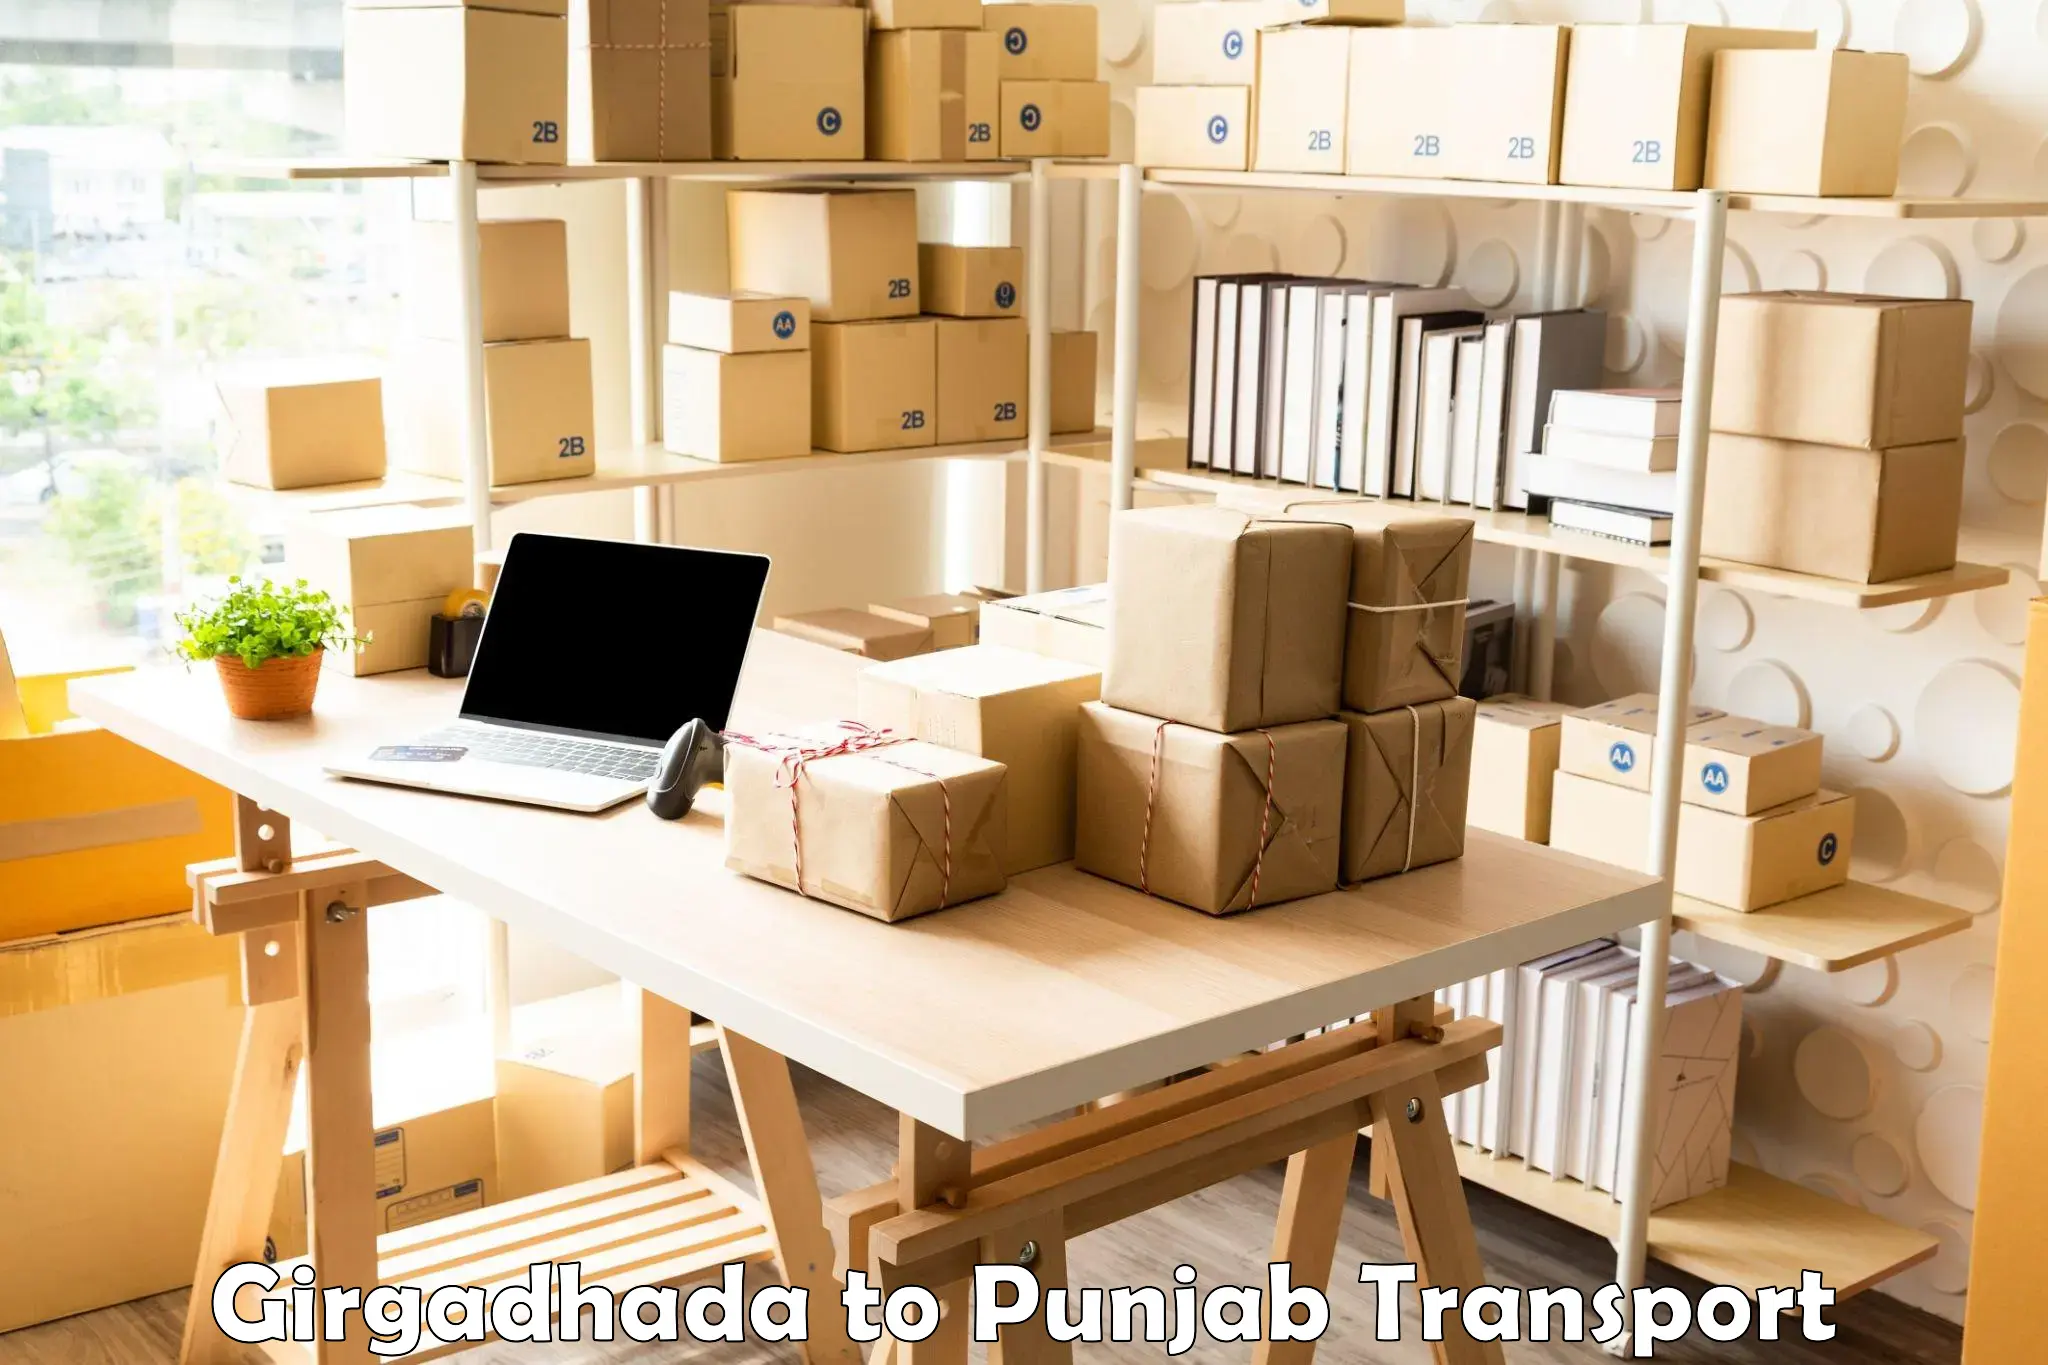 Package delivery services Girgadhada to Rajpura